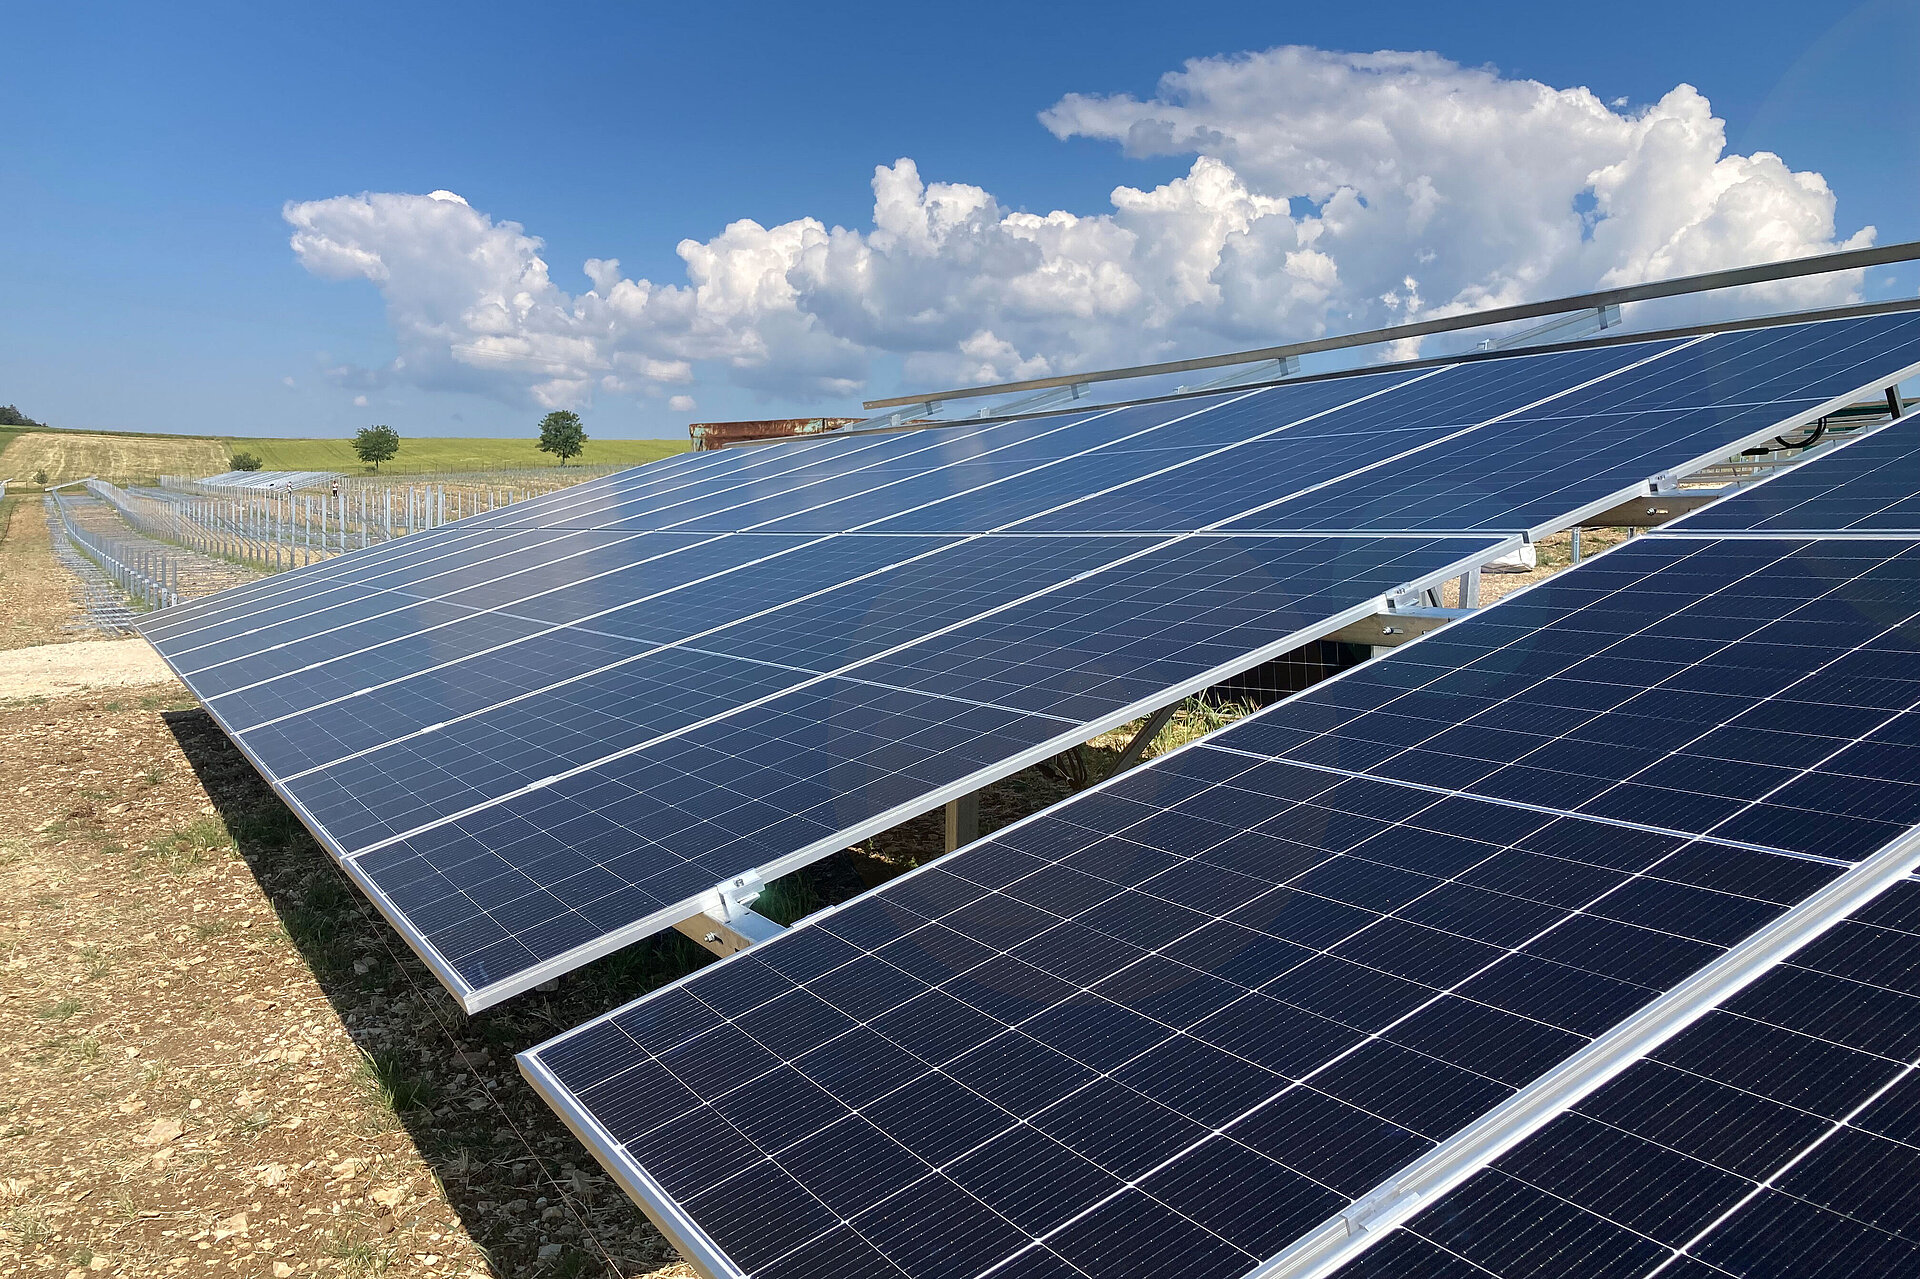 8 facts about ground-mounted photovoltaics